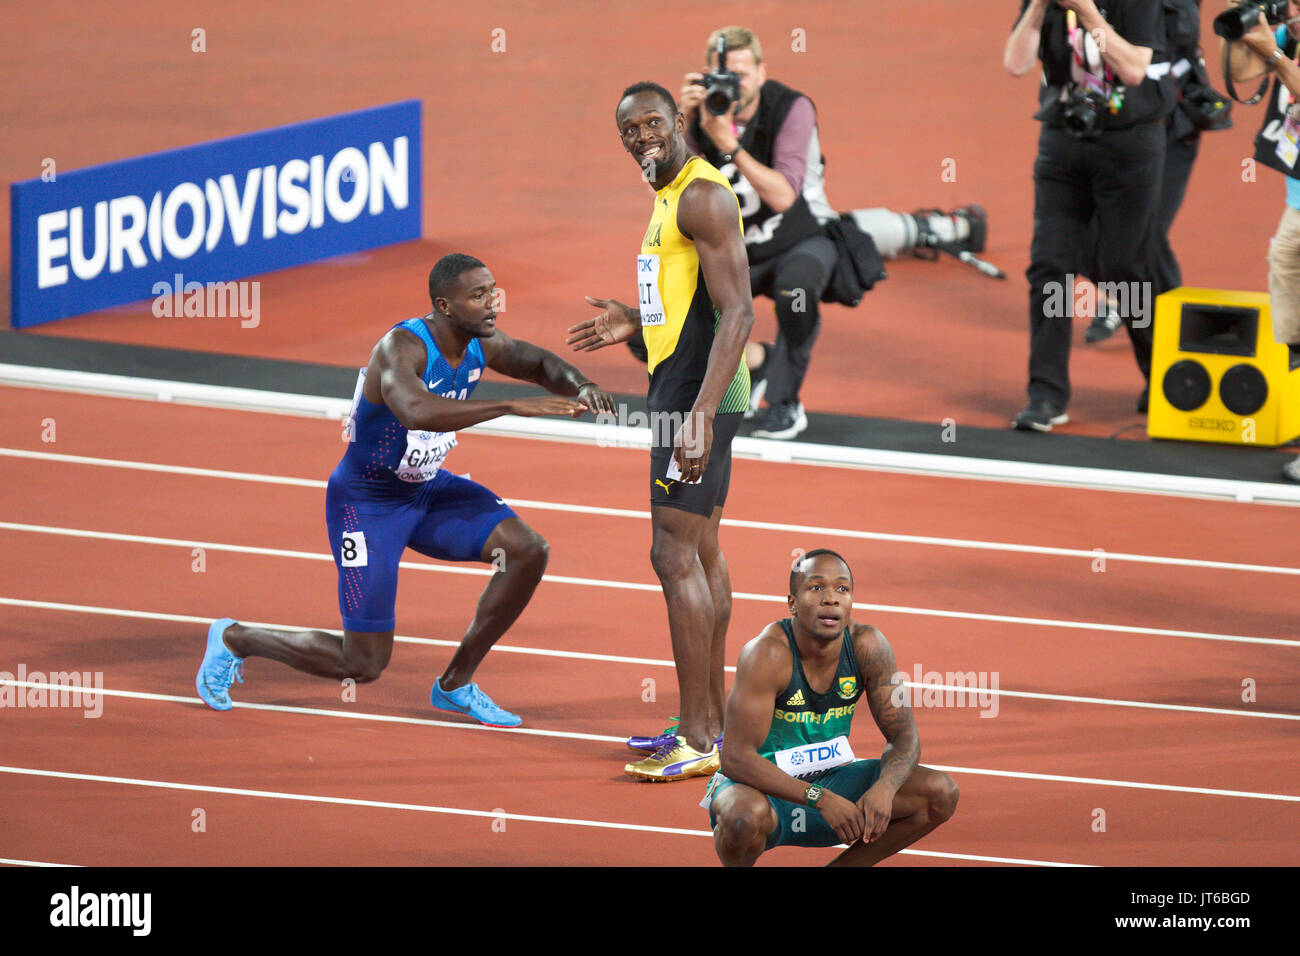 LONDON, ENGLAND - AUGUST 05: Usain Bolt  and Justin Gatlin (blue top) after the Men's 100m final during day two of the 17th IAAF World Athletics Championships London 2017 at The London Stadium on August 5, 2017 in London, United Kingdom.Justin Gatlin of the United States won the race. Stock Photo